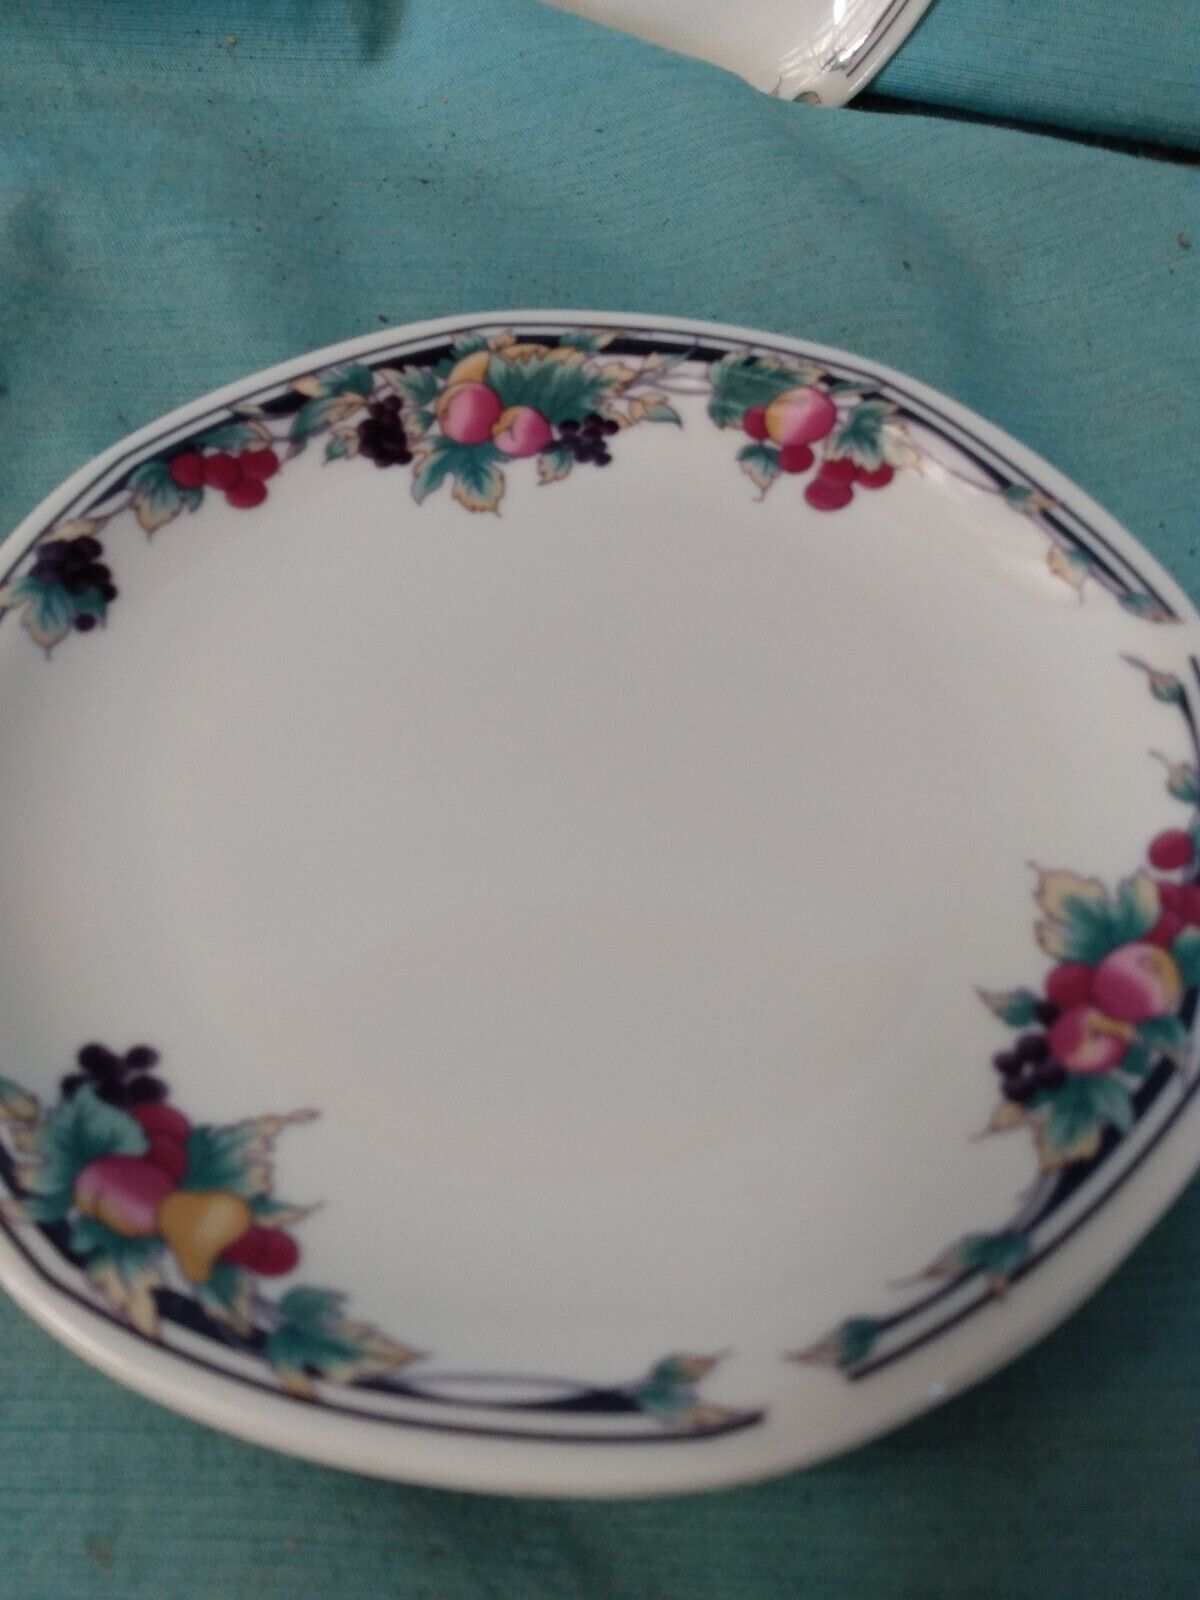 Primary image for Vintage Royal Doulton Autumn's Glory Salad Plate LS1086  1991 8.5" Retired